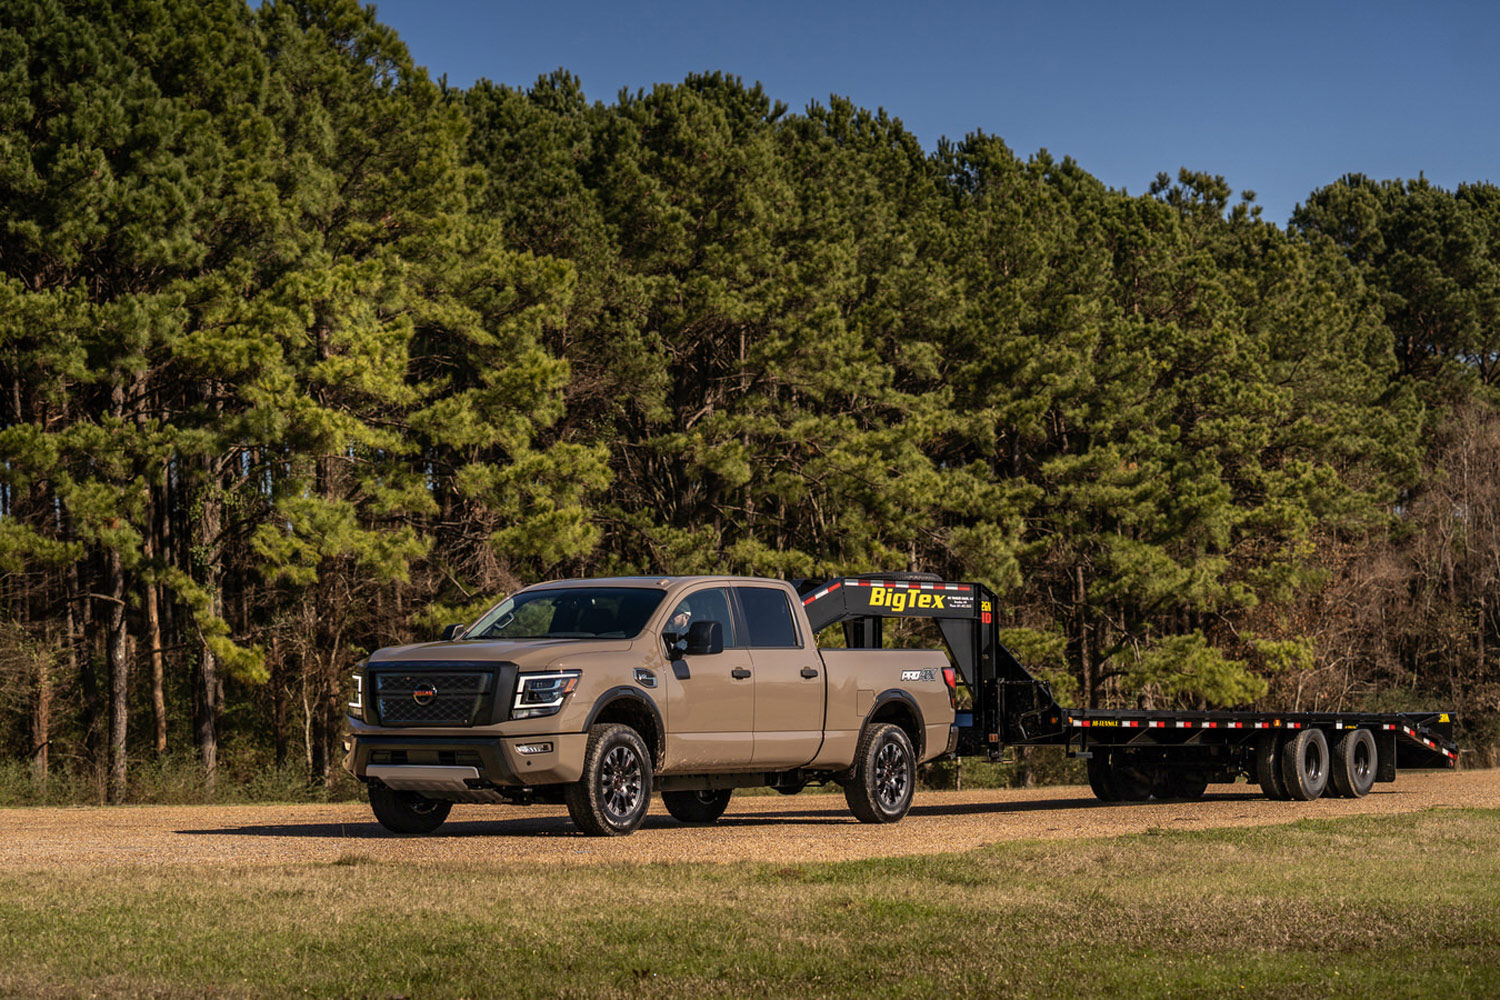 2023 Nissan Titan XD with a fifth-wheel trailer parked on a dirt road by some trees.